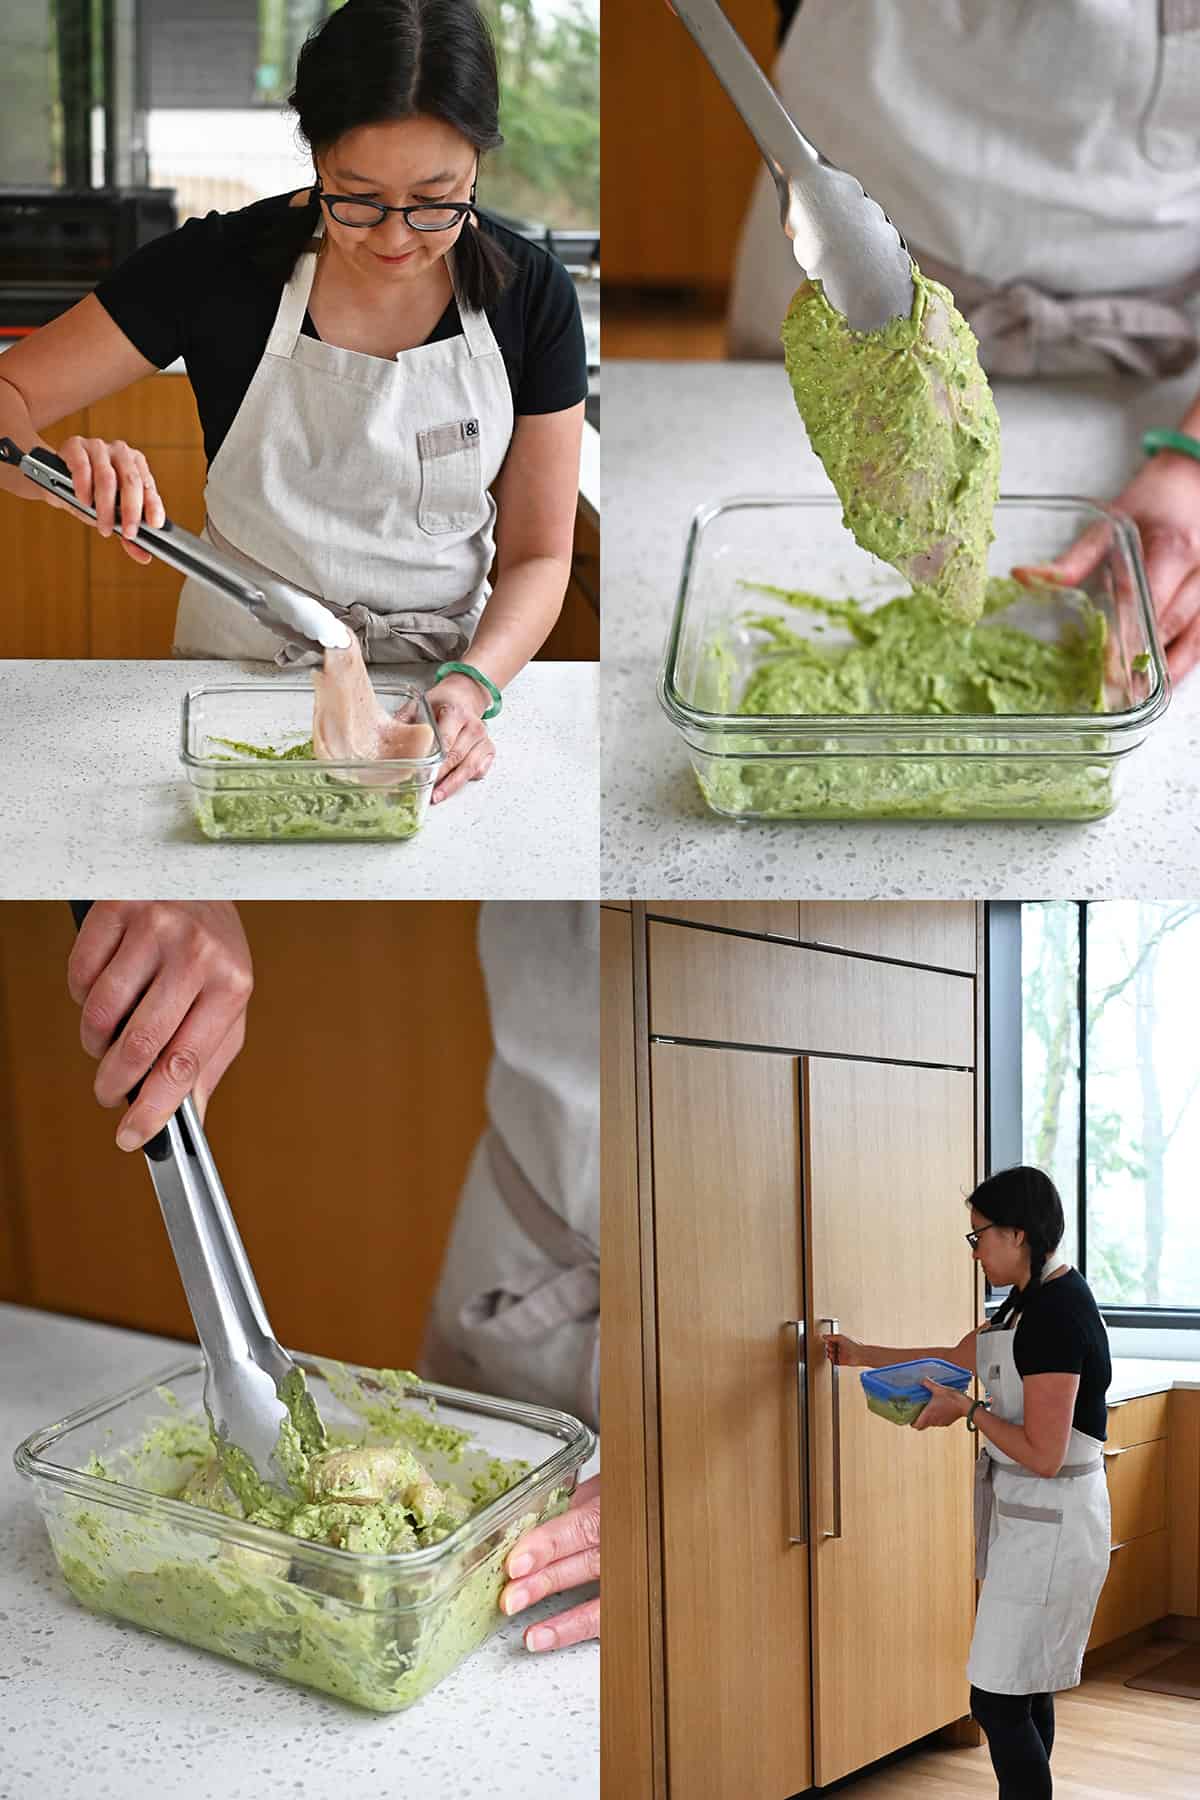 Four sequential shots that show an Asian woman adding chicken cutlets to a glass storage container filled with pesto and mayonnaise sauce and then covering it and placing it in the refrigerator.